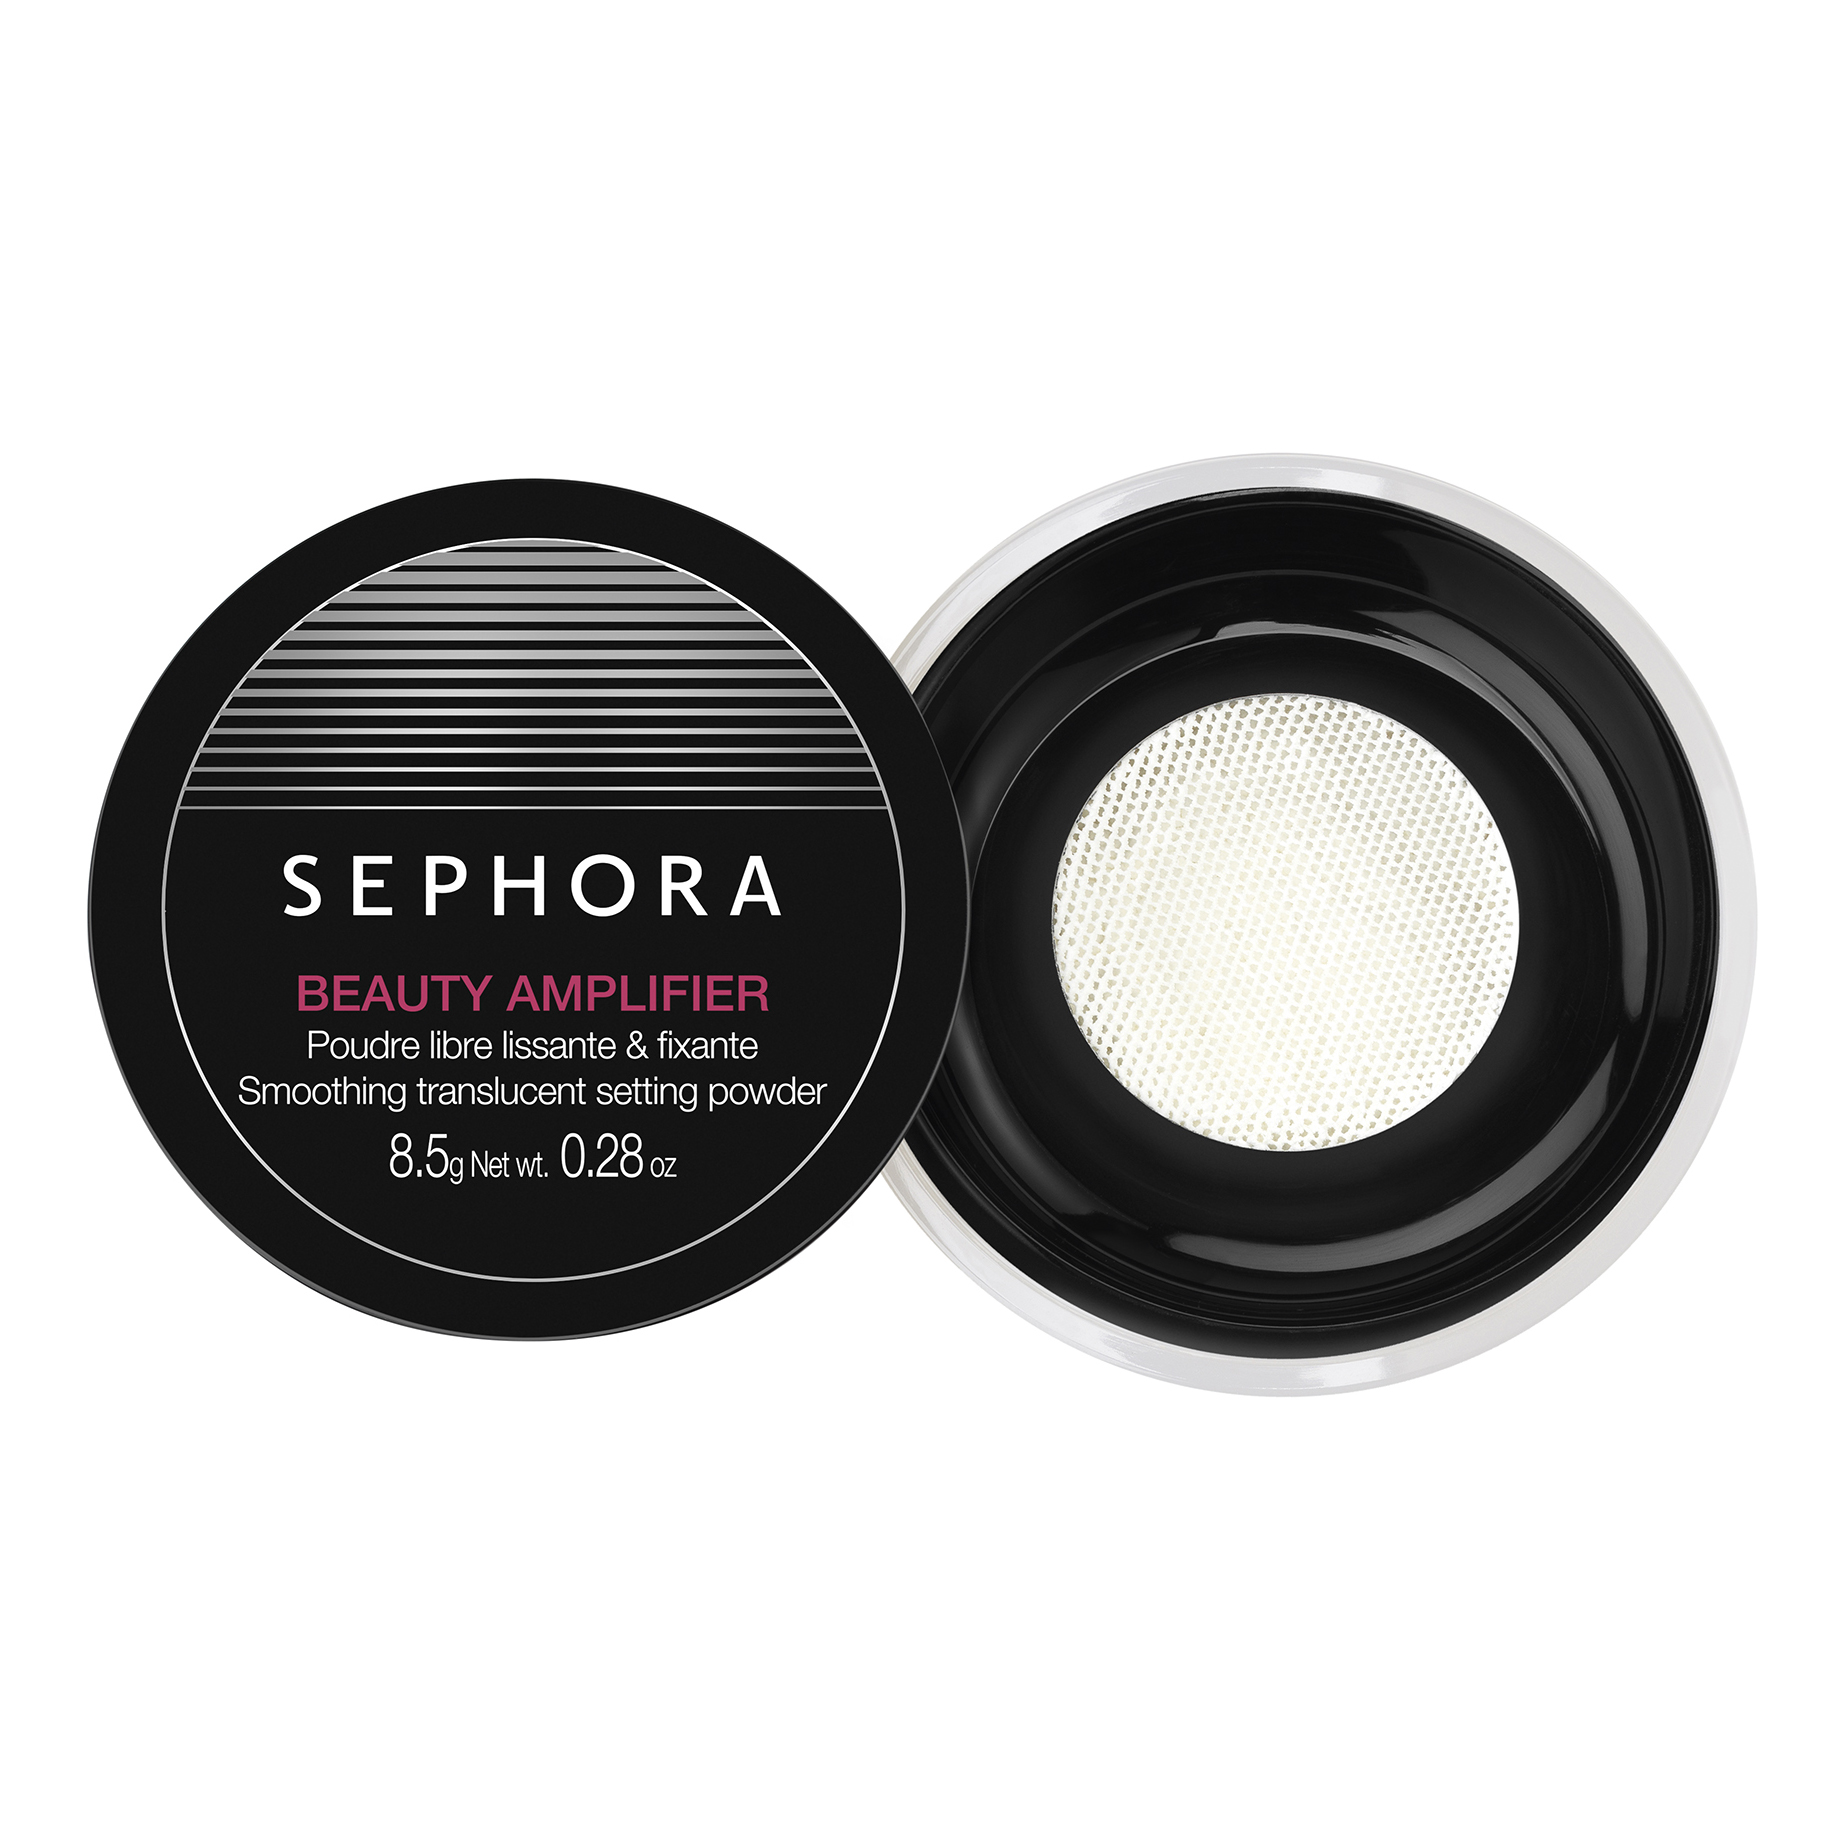 Review Sephora Beauty Amplifier Smoothing Translucent Setting Powder (1)